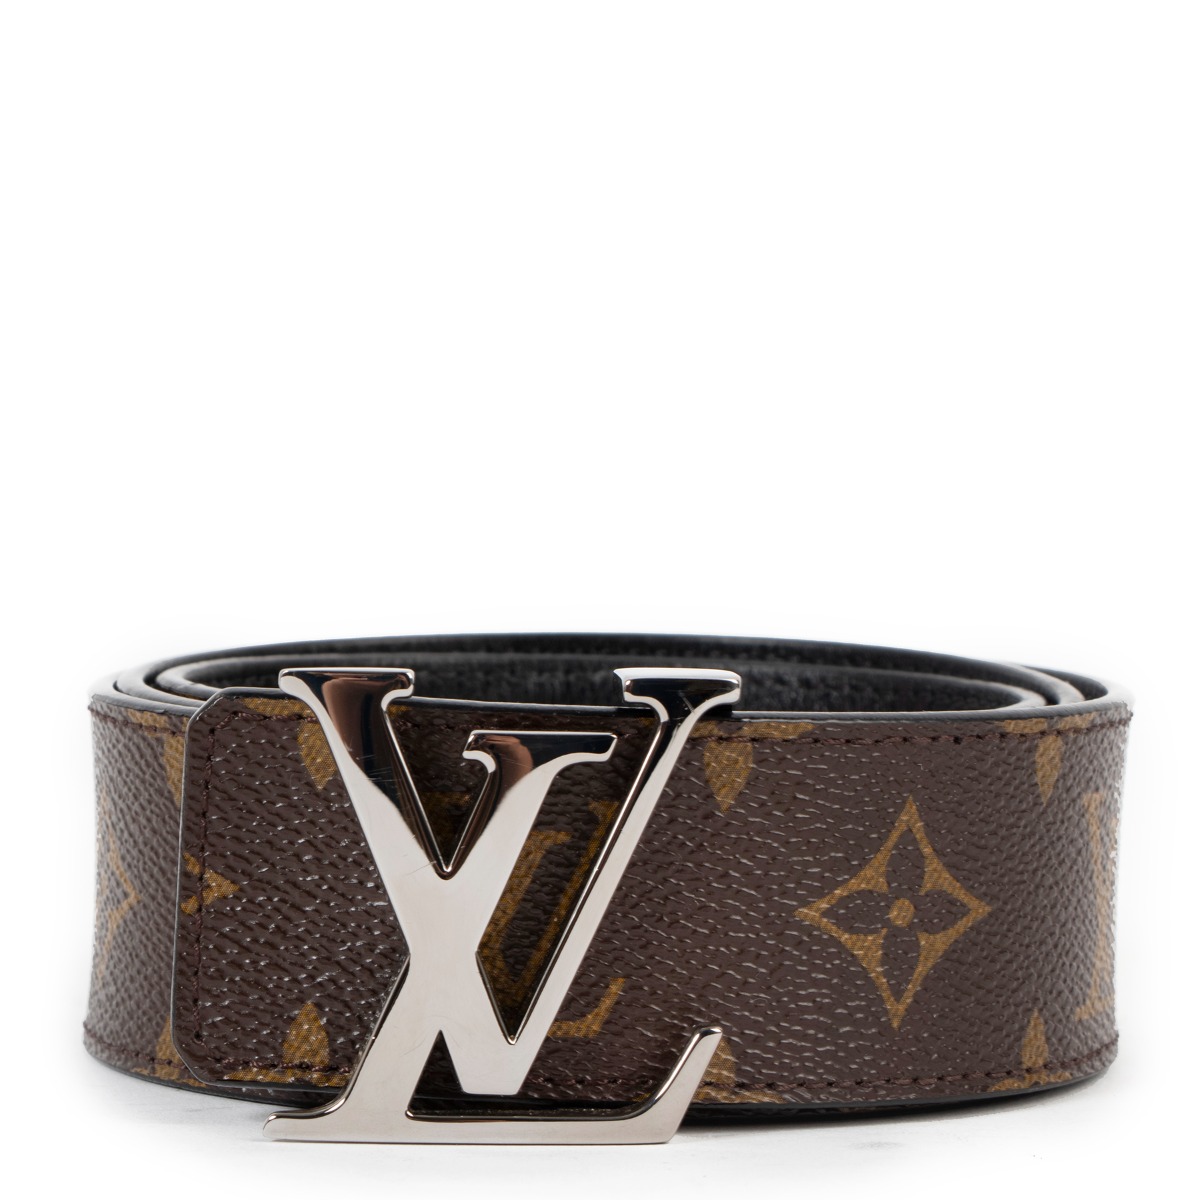 Only 140.00 usd for Louis Vuitton cintura Initiales Online at the Shop